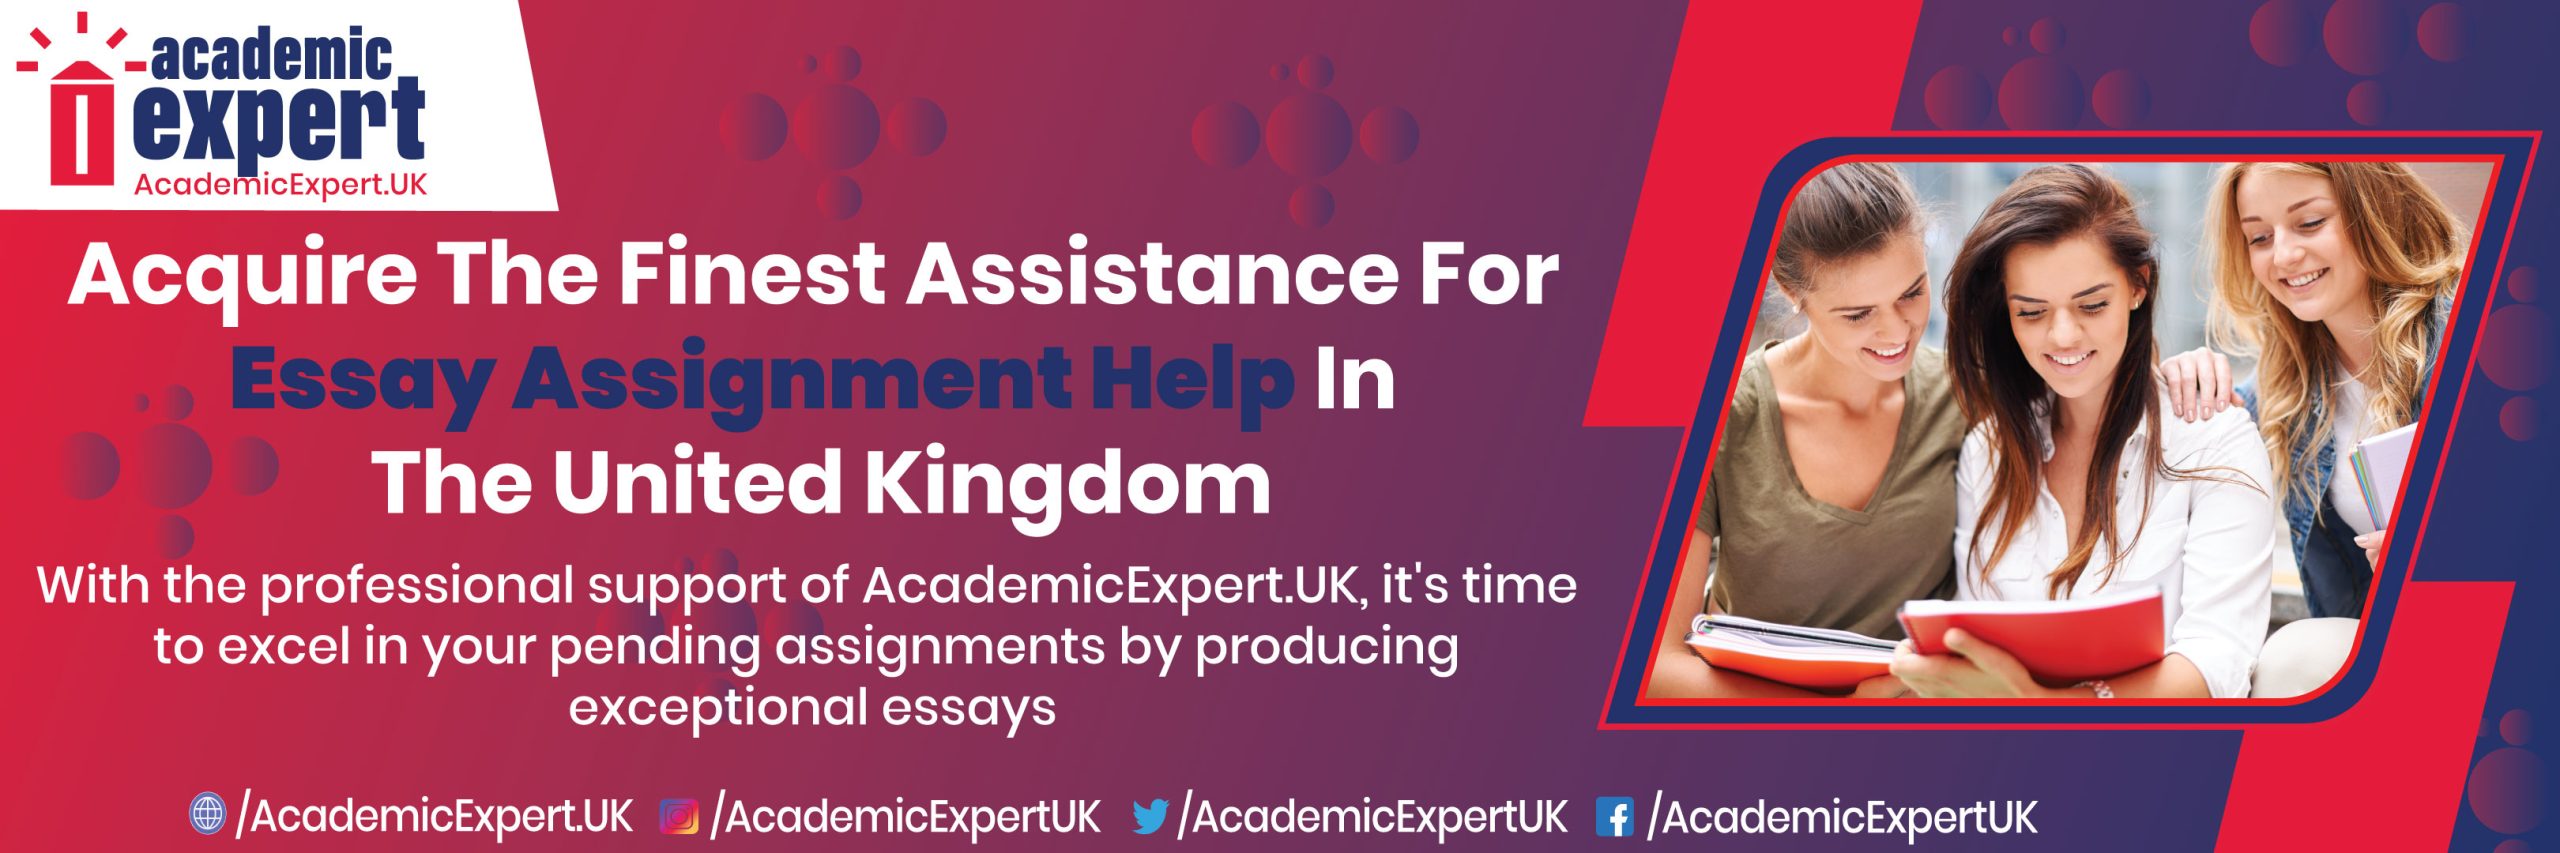 ACQUIRE THE FINEST ASSISTANCE FOR ESSAY ASSIGNMENT HELP IN THE UNITED KINGDOM